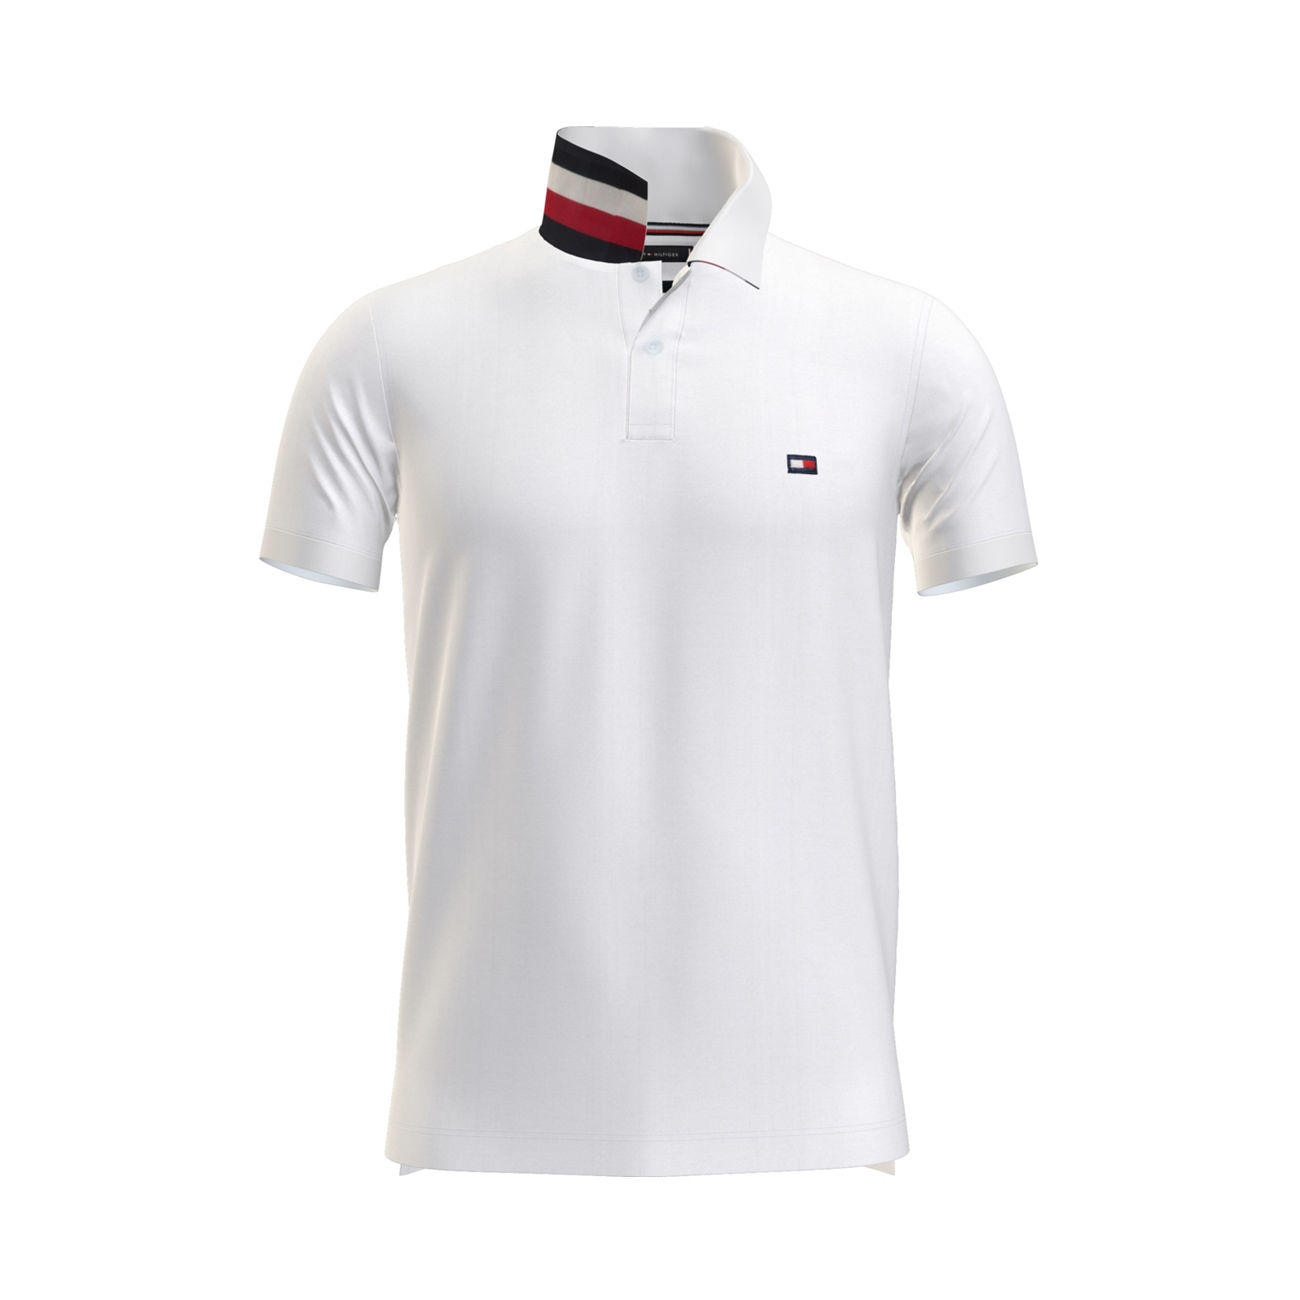 TOMMY HILFIGER PIQUET POLO SHIRT WITH TRICOLOR UNDERNECK Man White